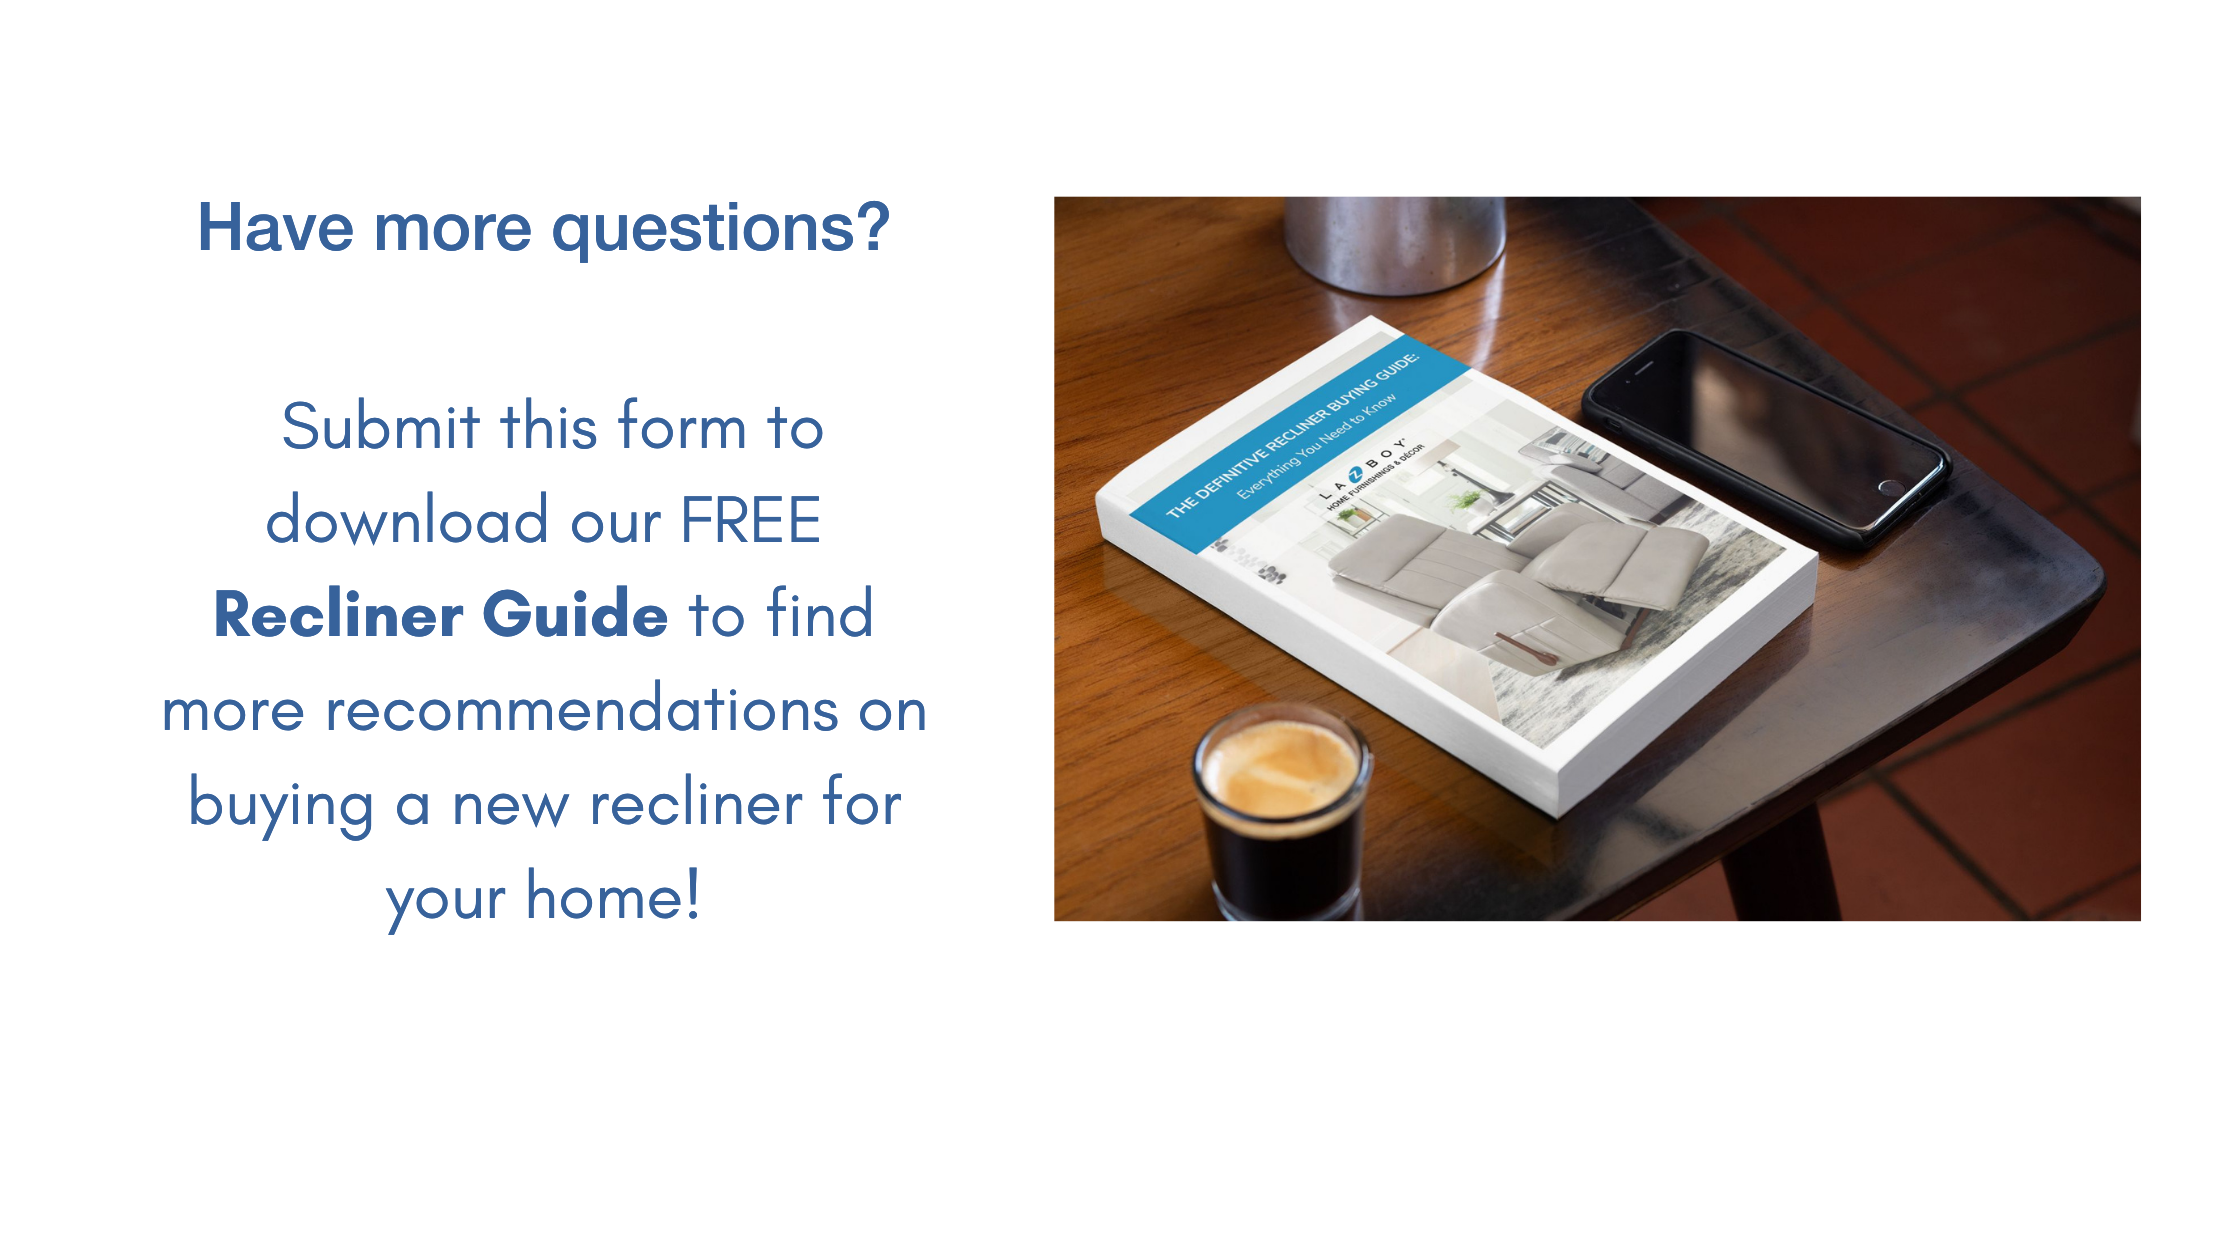 Have more questions Submit this form to download our FREE Furniture Guide to find more recommendations on buying new furniture for your home!